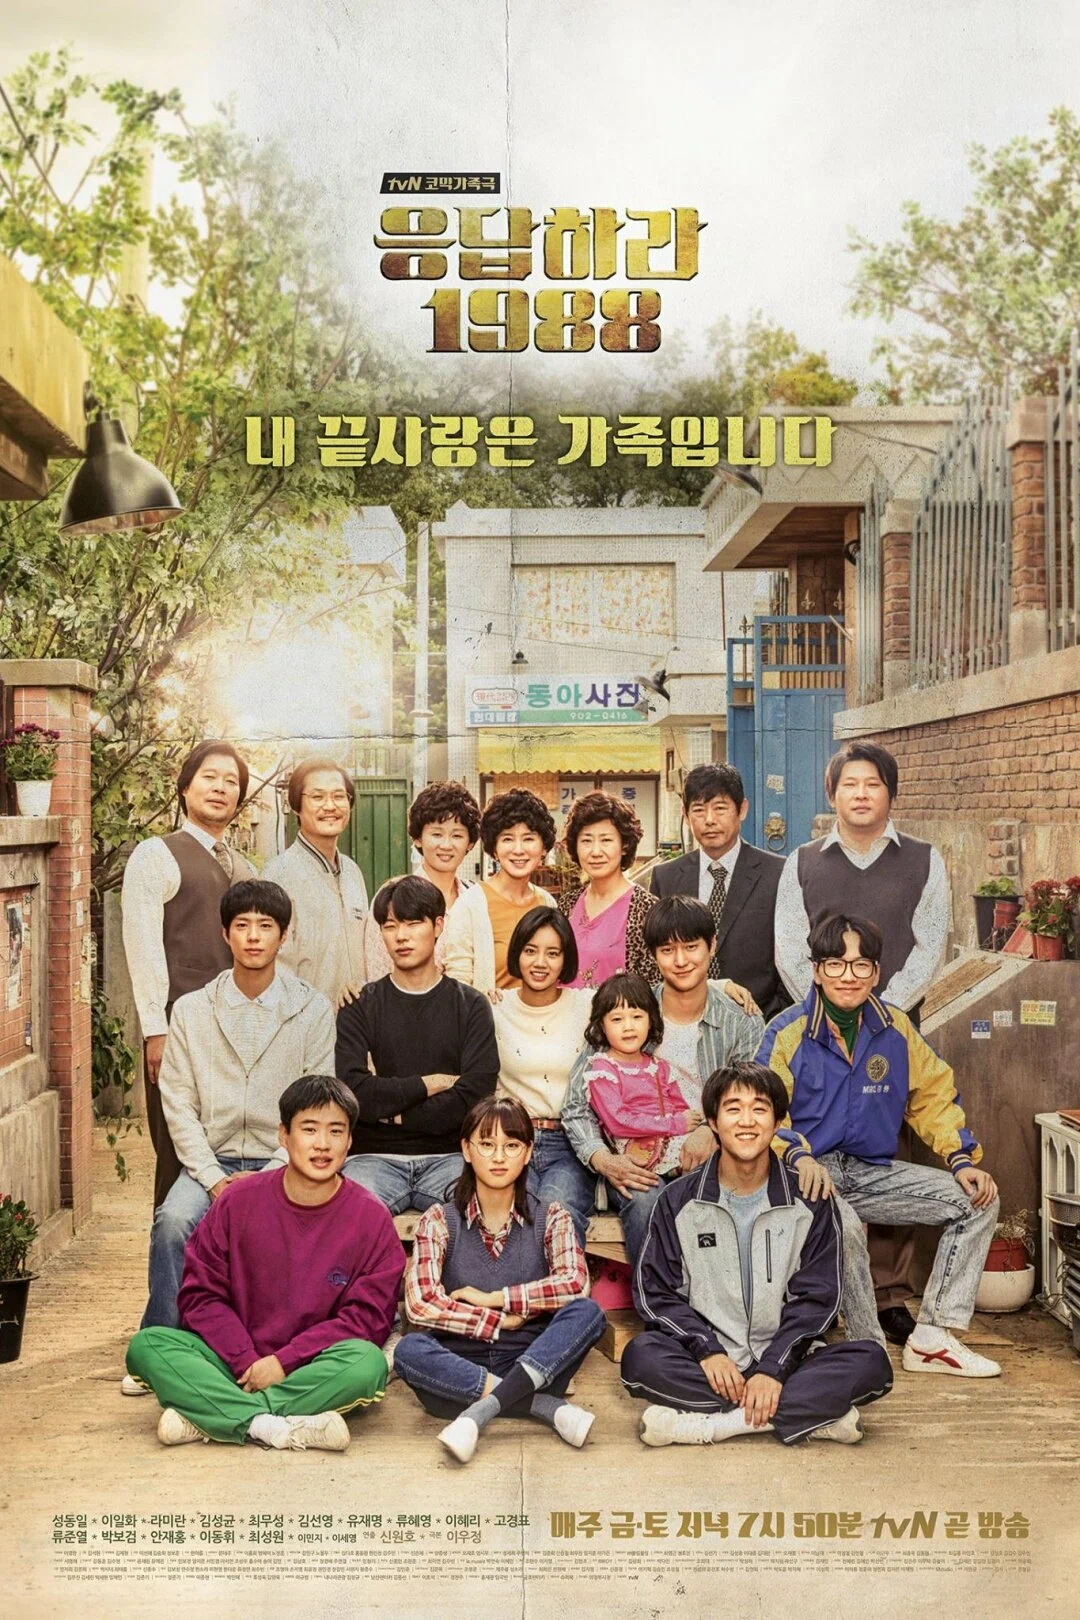 Reply 1988/from open access